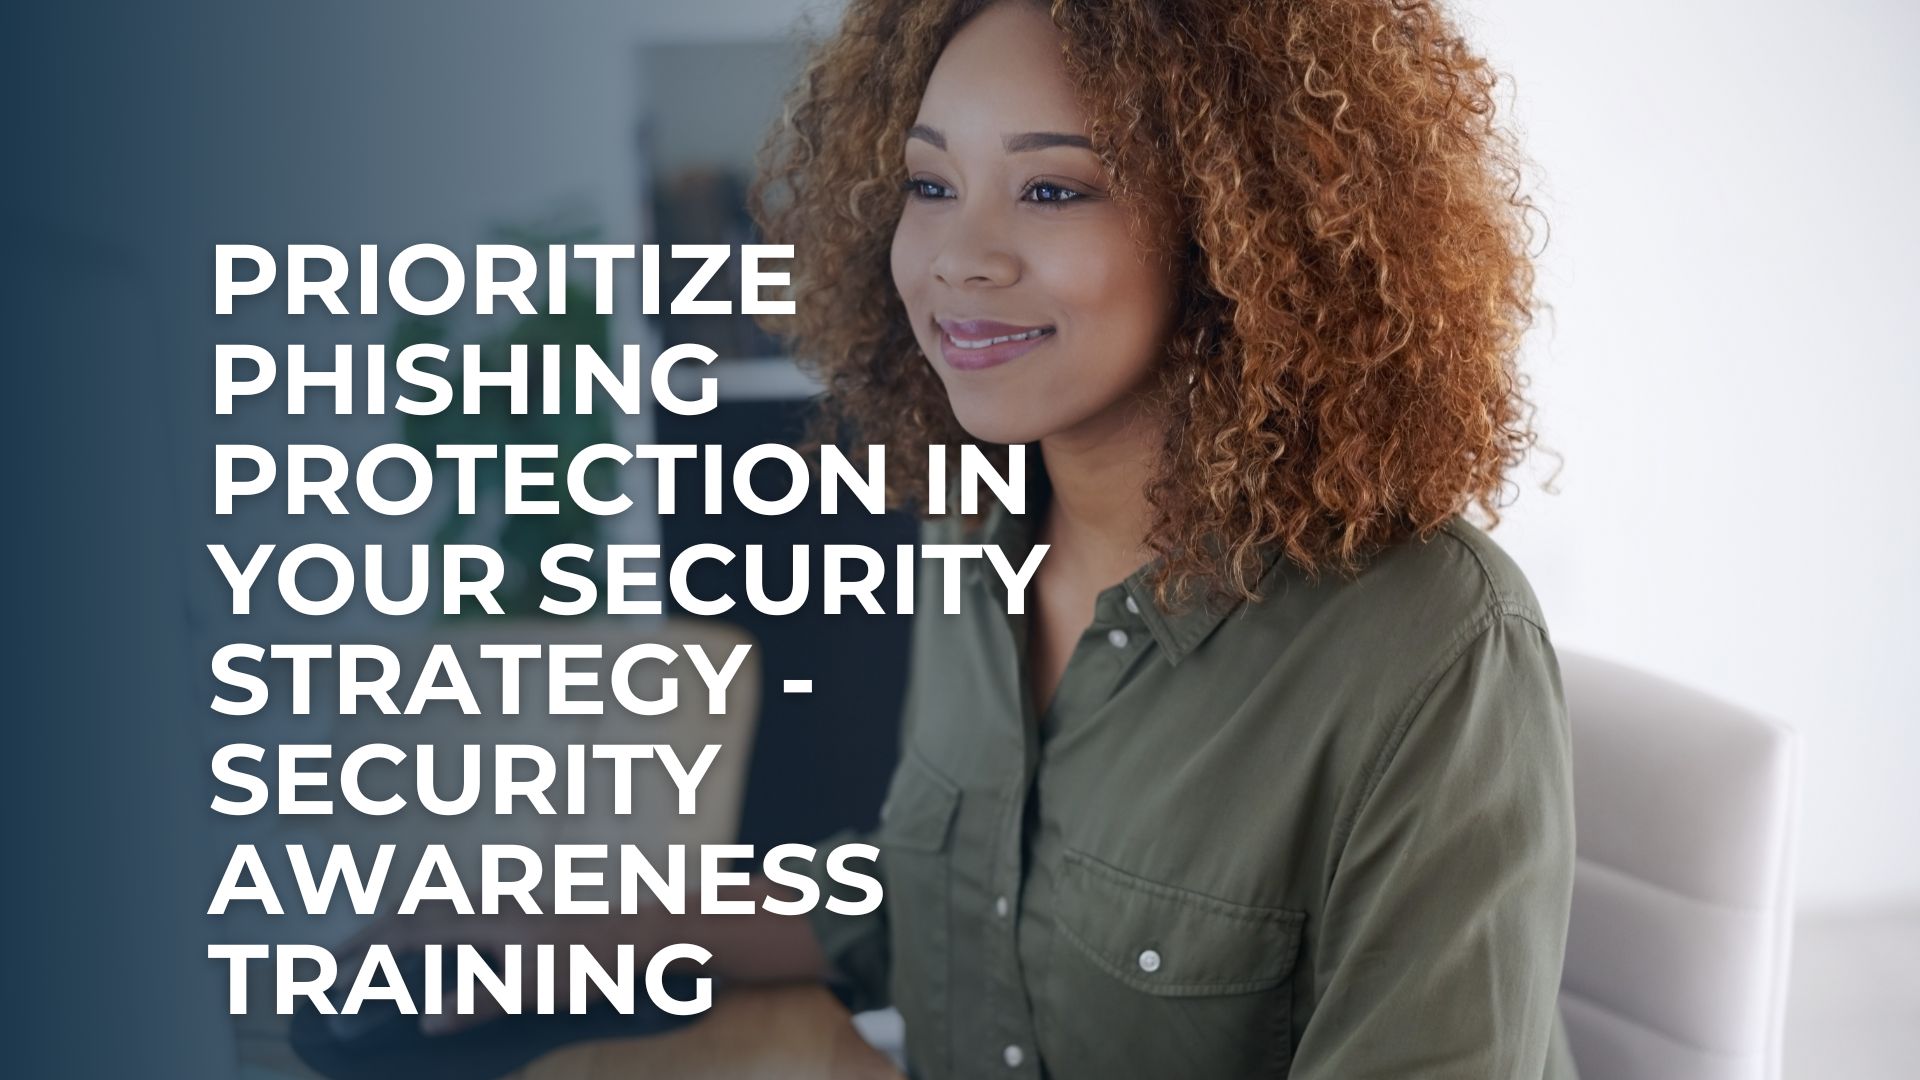 Prioritize Phishing Protection in Your Security Strategy - Security Awareness Training